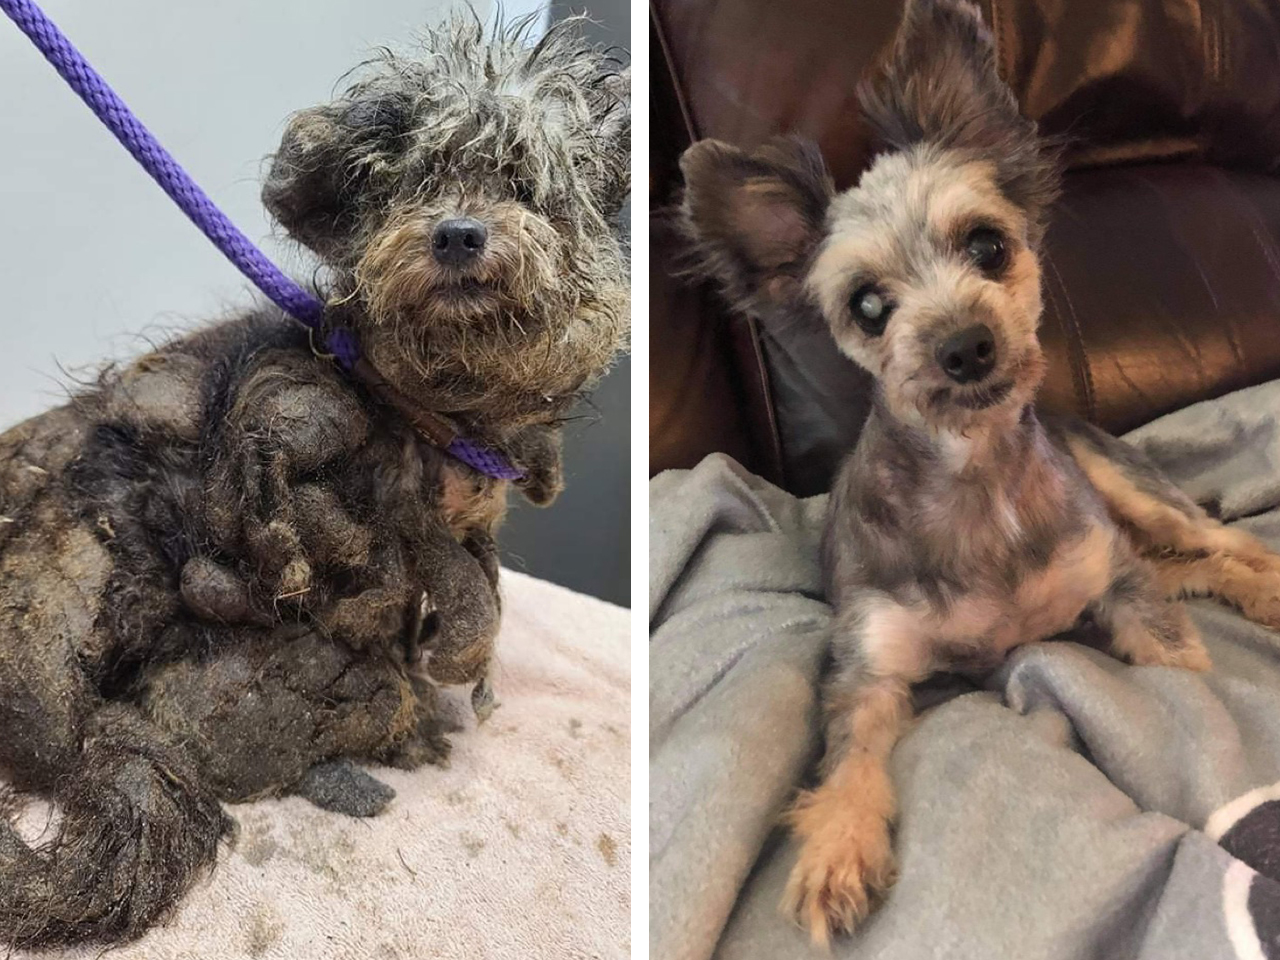 Godiva was found in deplorable condition. Her mats were so severe, her rescuers worried about injuries under all that fur. Groomers began the slow, tedious process of cutting out the mats. After hours of grooming, and two pounds of extra fur, a little girl emerged that’s as sweet as her name.